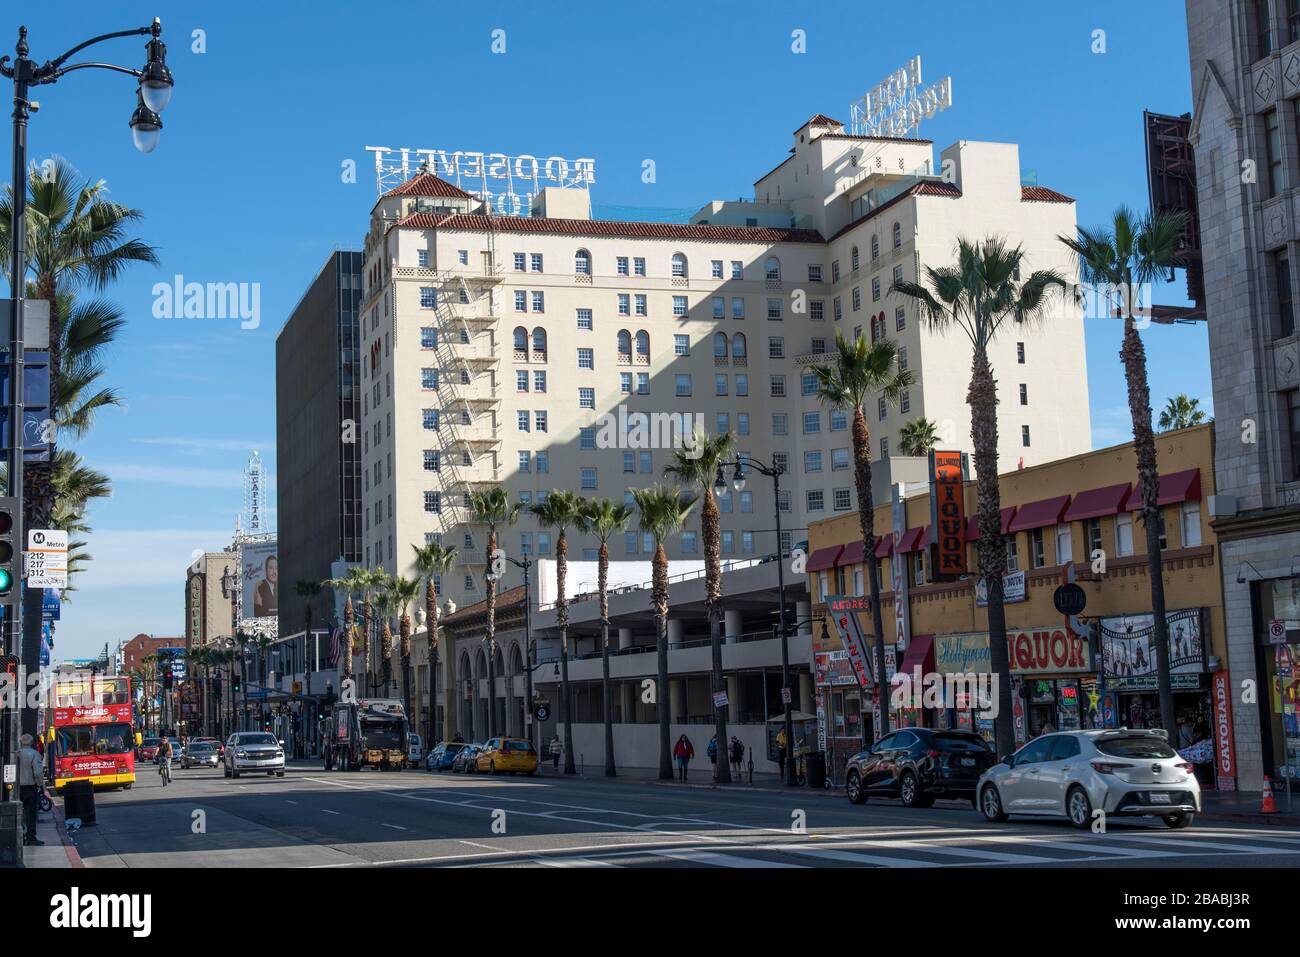 HOLLYWOOD, CA/USA - JANUARY 27, 2020: The  Hollywood Roosevelt Hotel on the Walk of Fame where Marilyn Monroe once lived Stock Photo